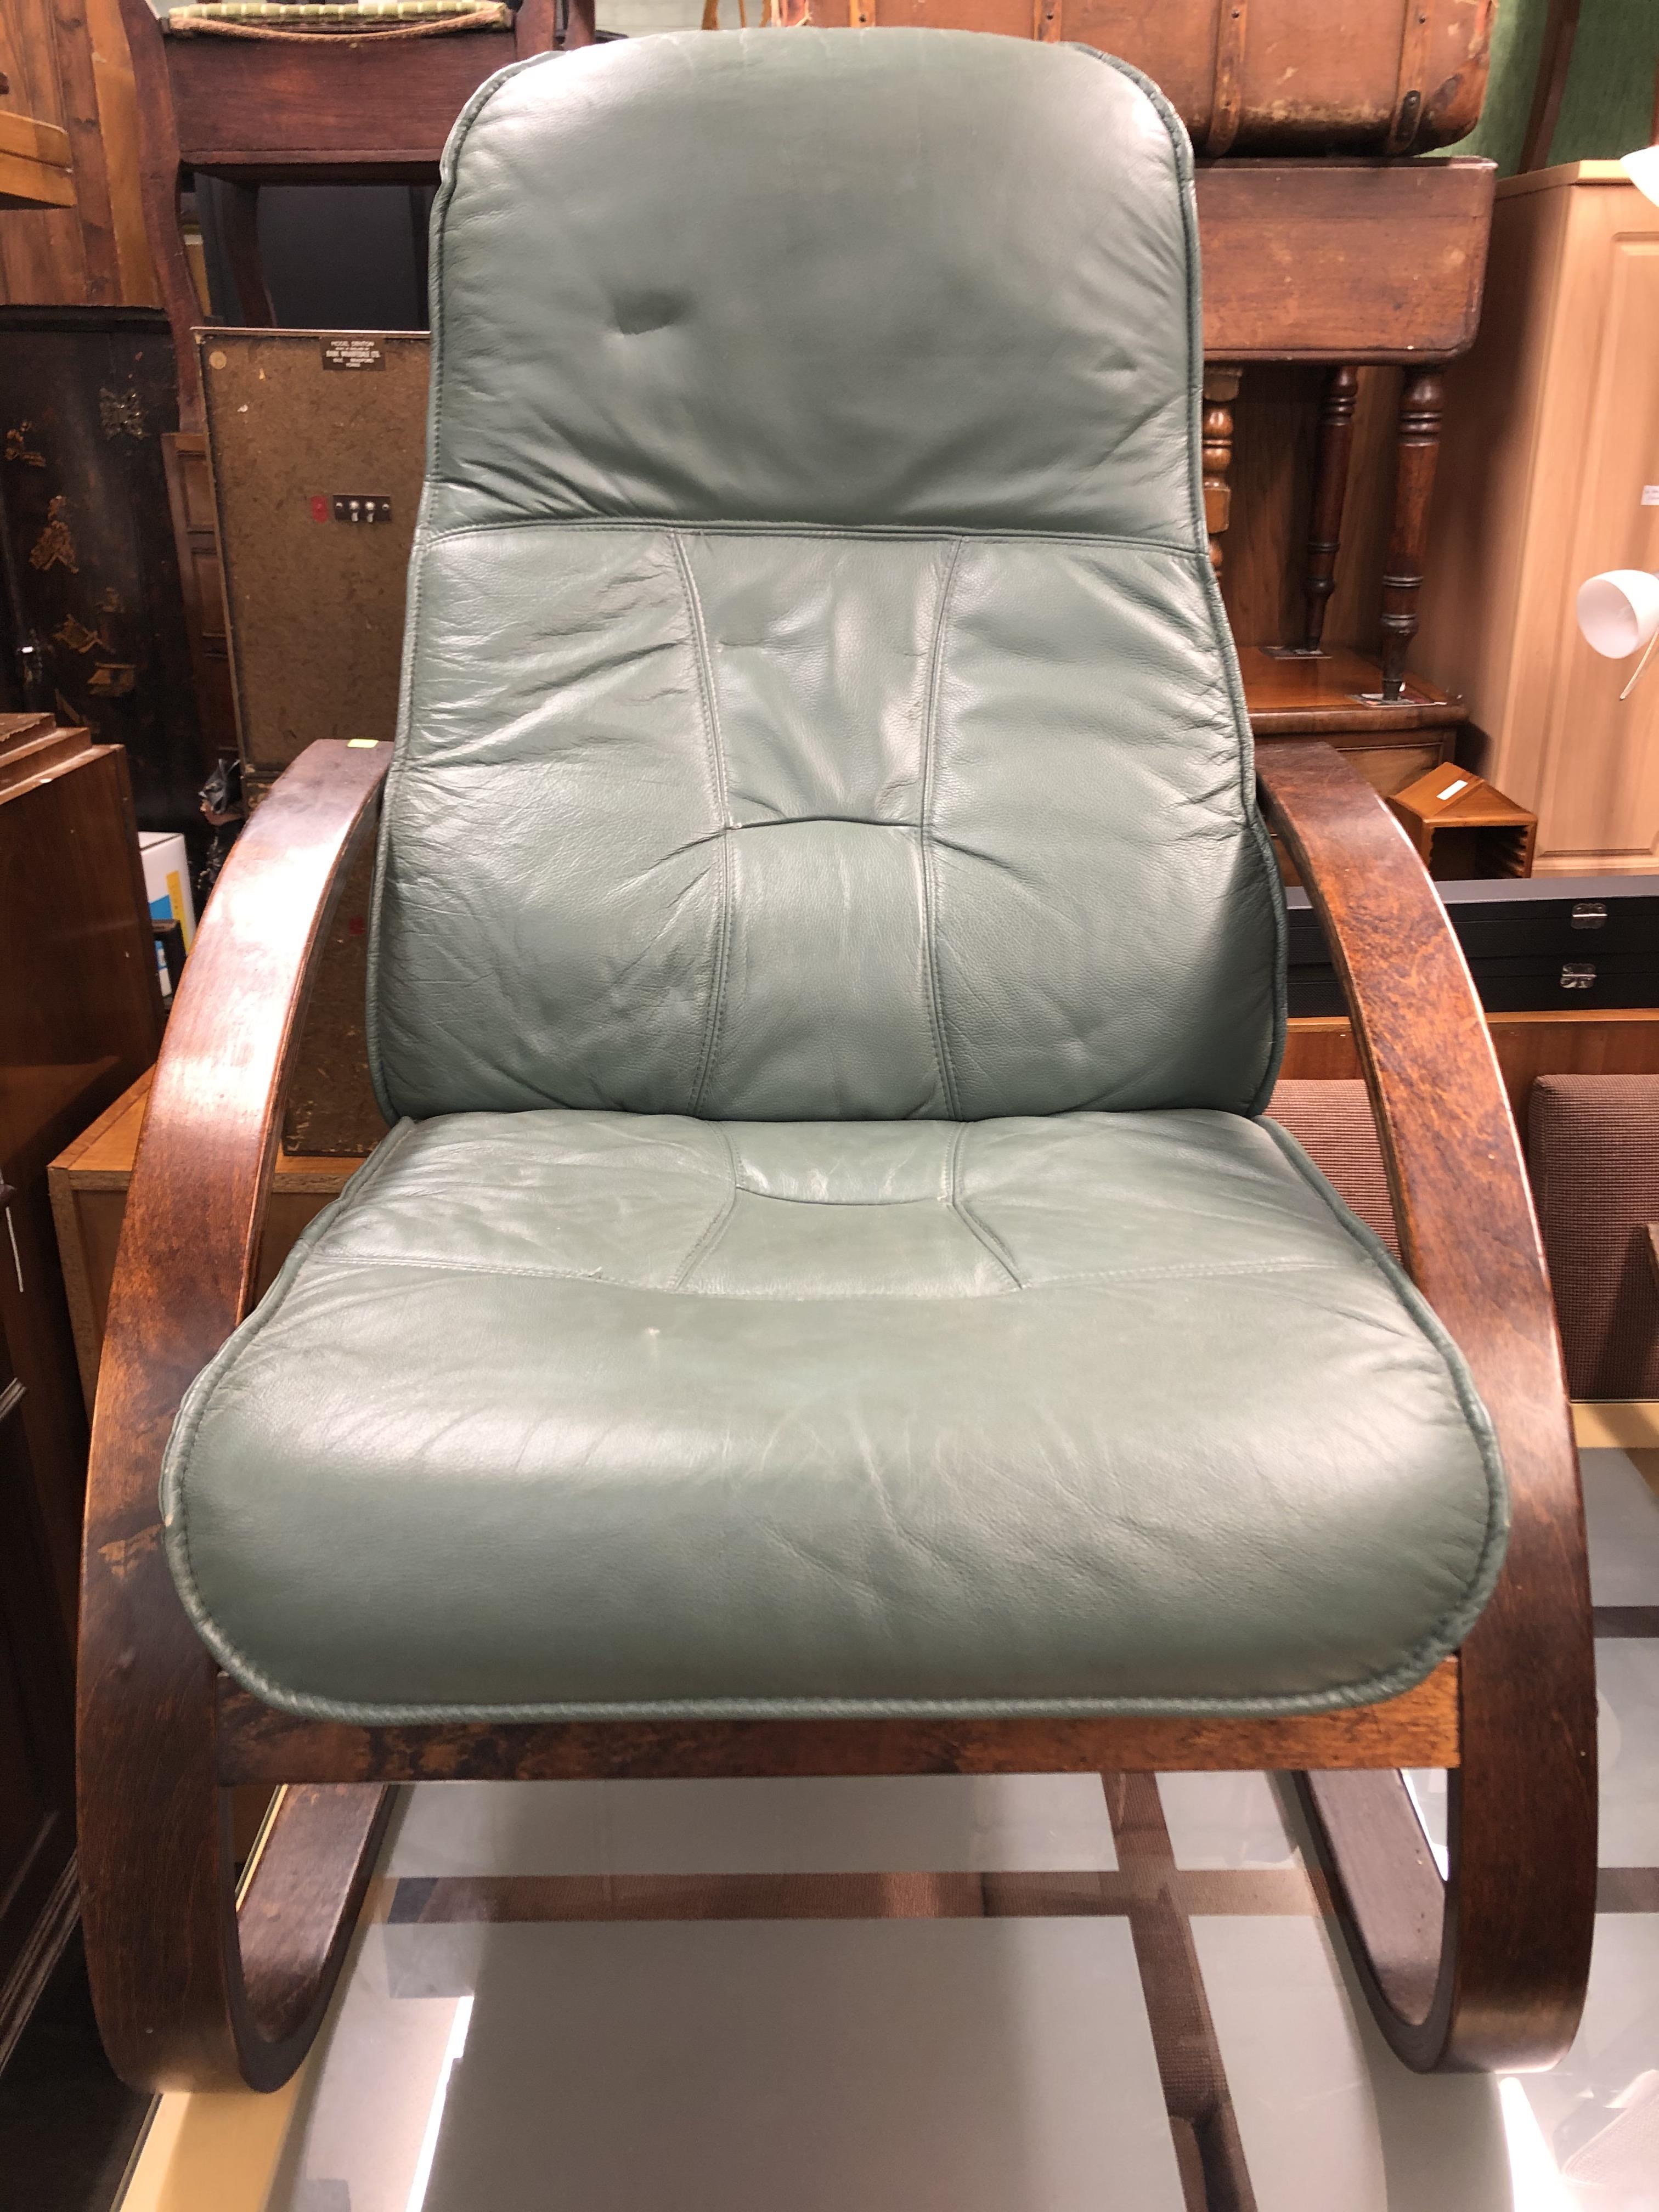 MINT GREEN LEATHER EASY CHAIR - Image 2 of 2